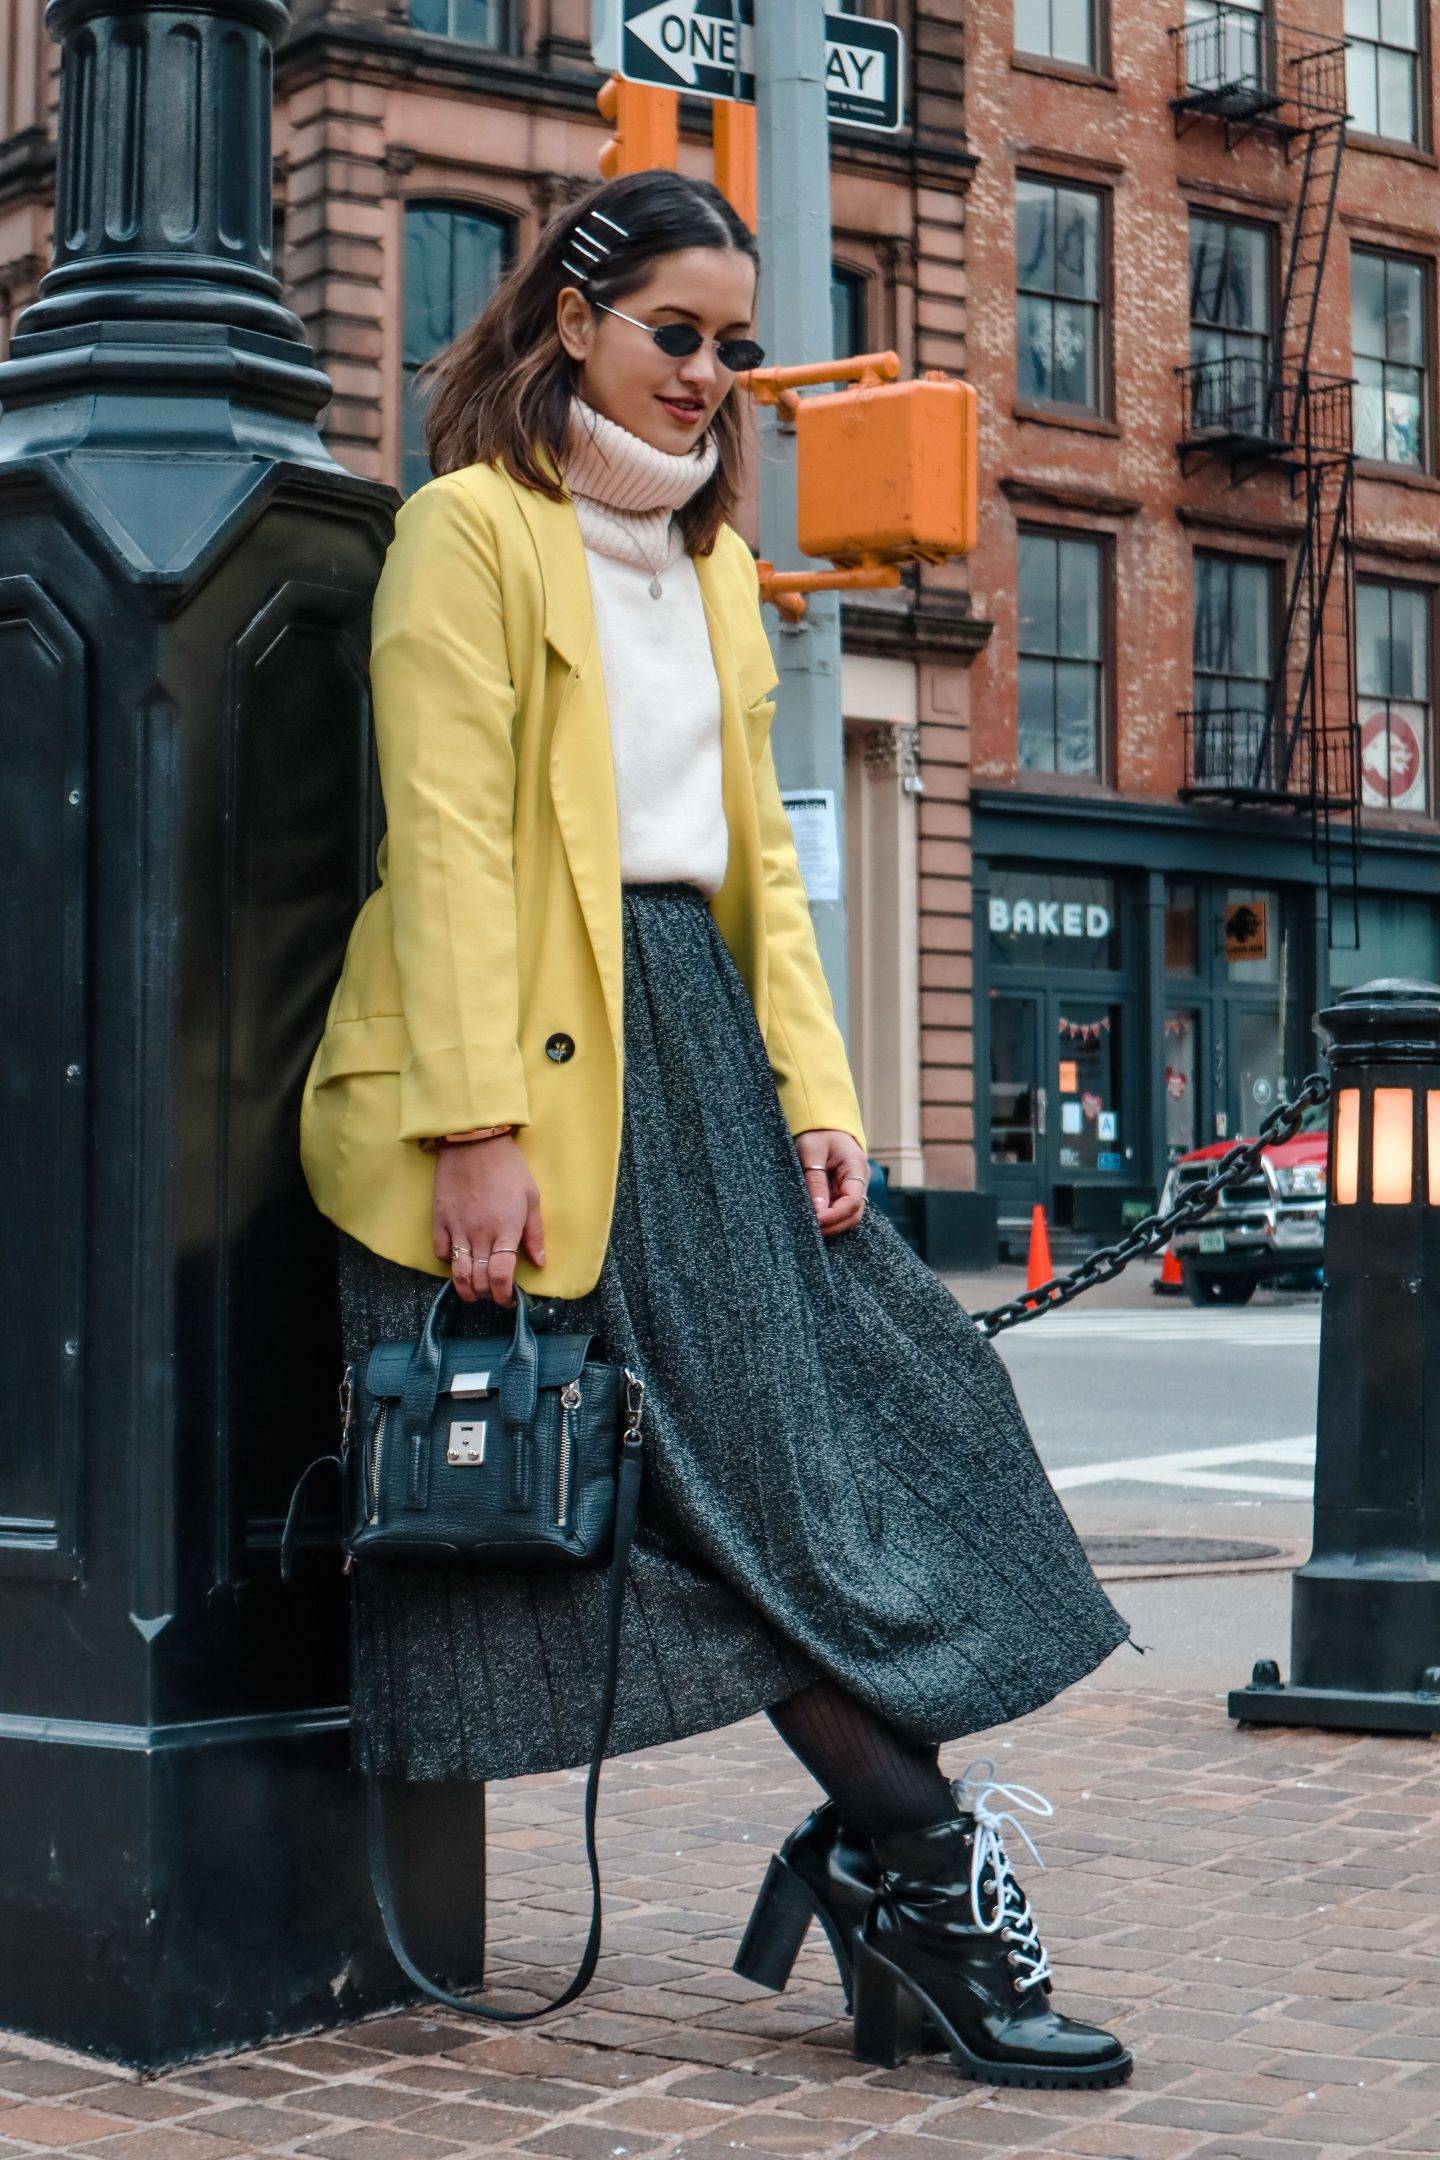 #FlorenNYFW – February 2019 – Look 3: My old yellow blazer + «How to stay creative»